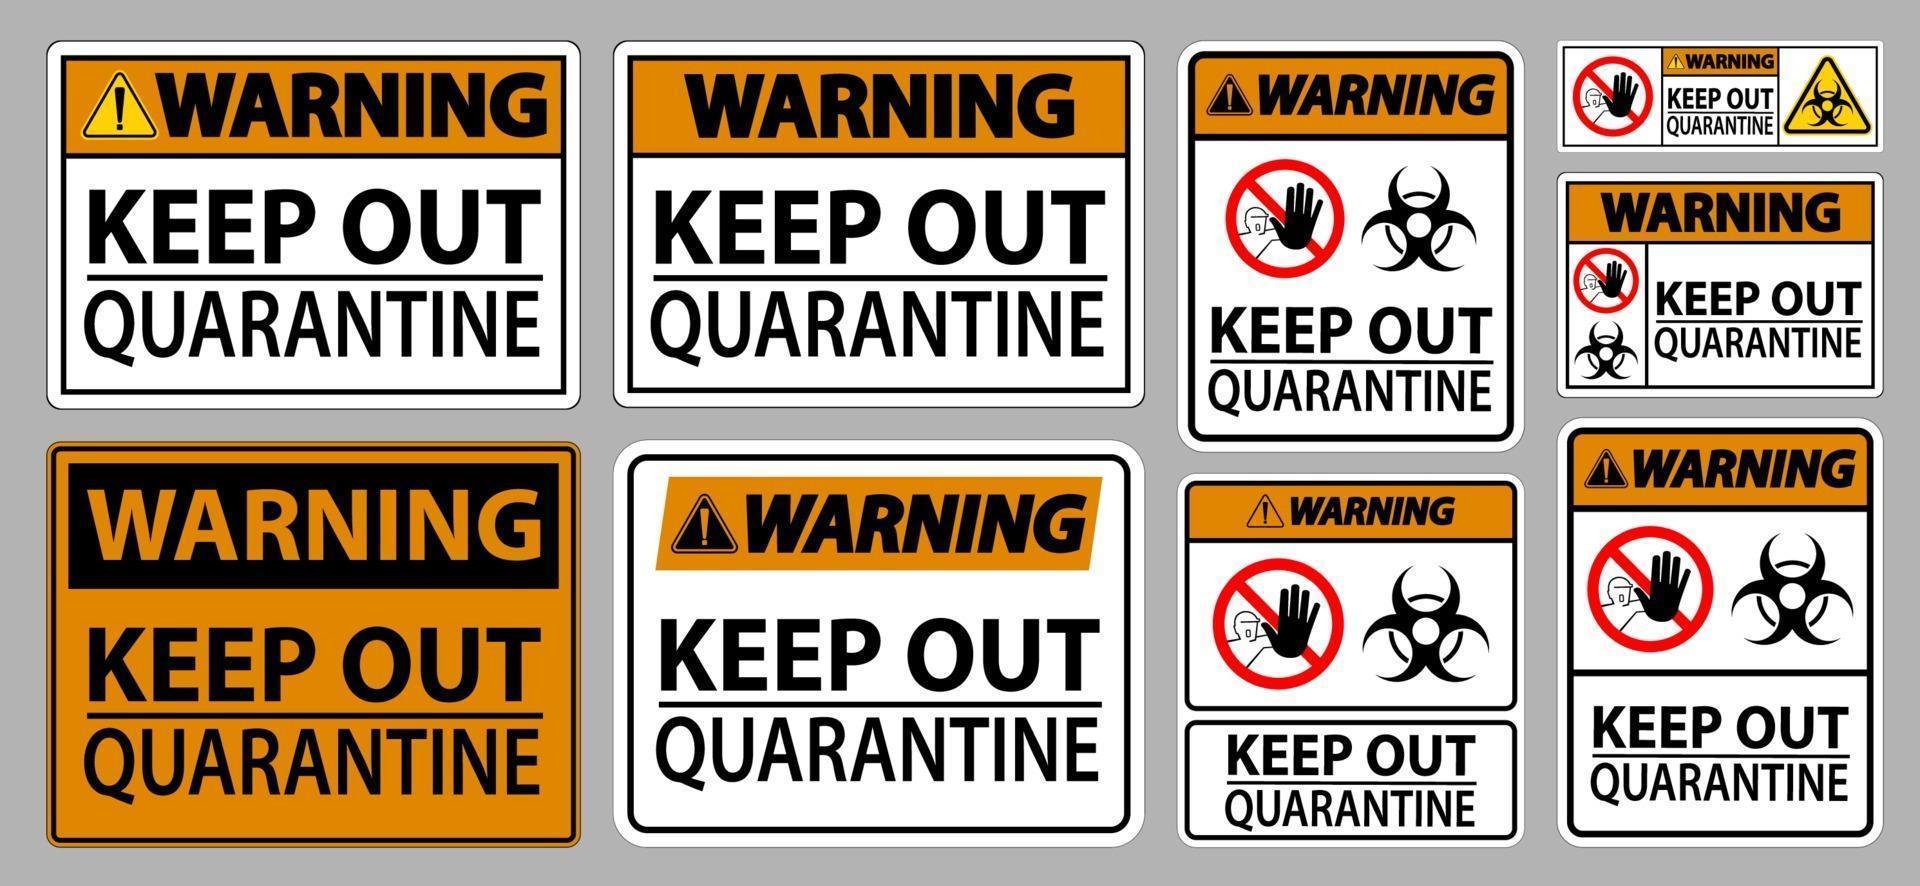 Warning Keep Out Quarantine Sign Isolate On White Background,Vector Illustration EPS.10 vector